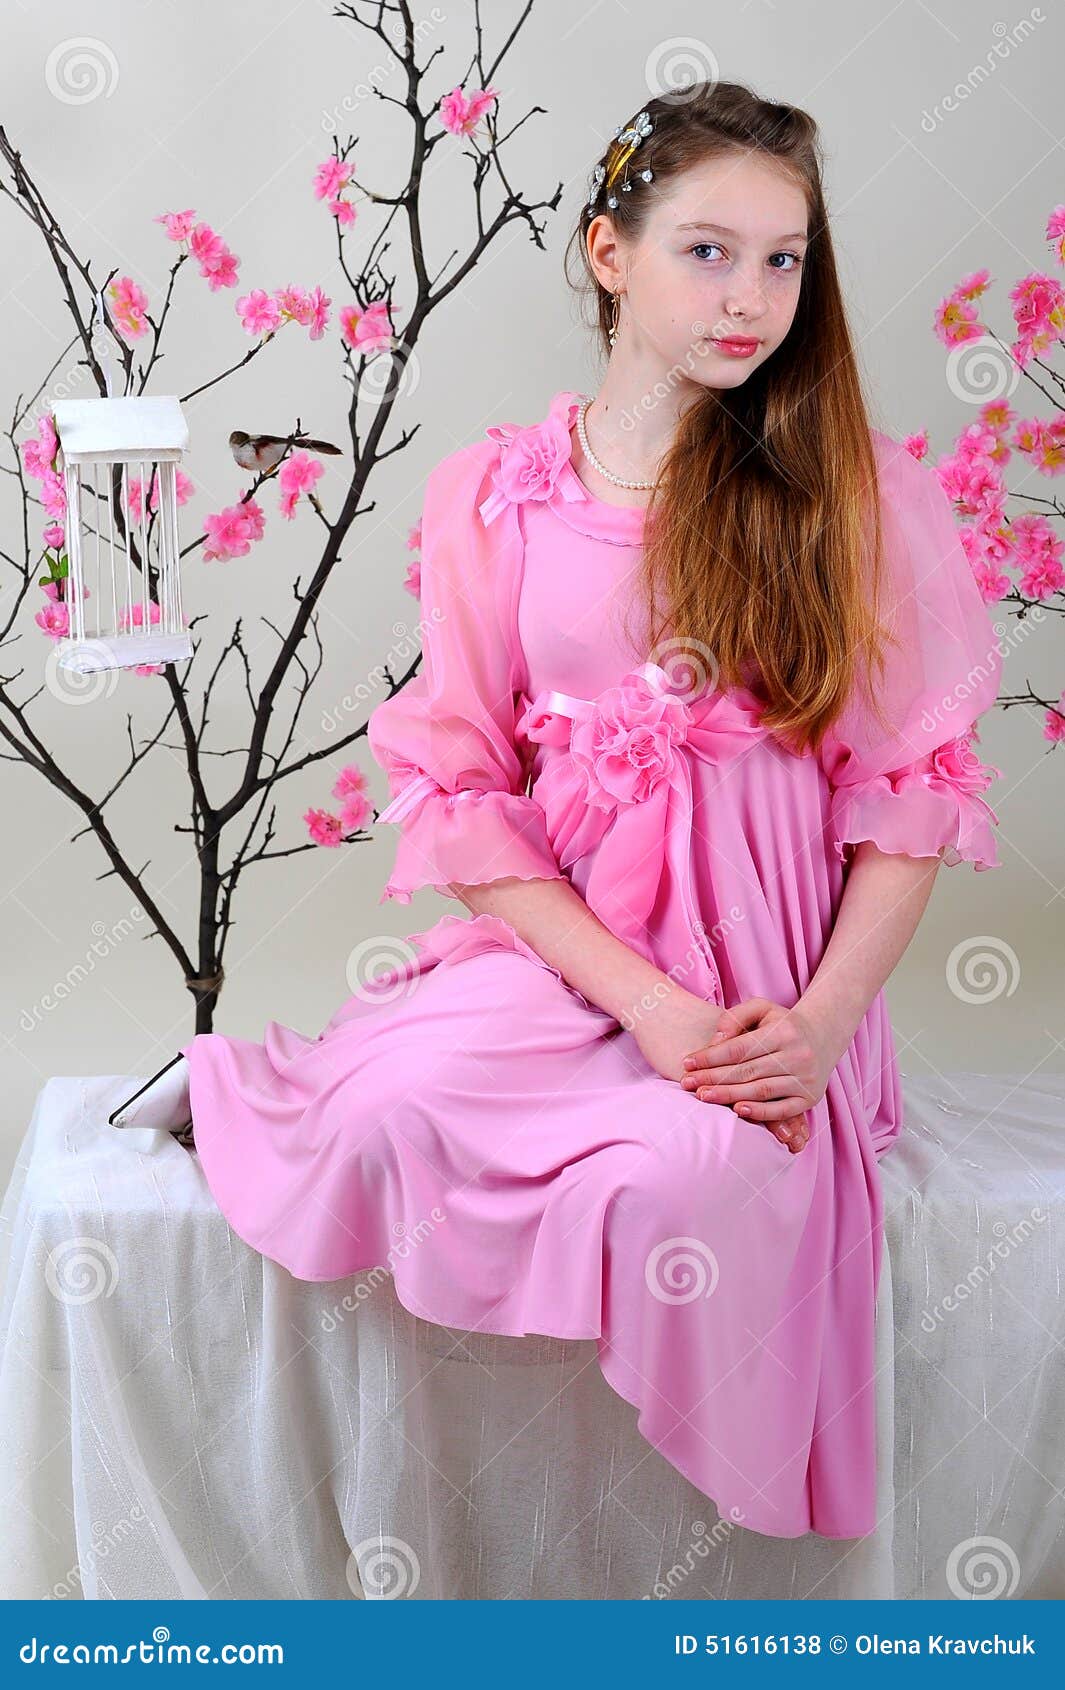 Girl in a pink dress stock photo. Image of people, eyes - 51616138